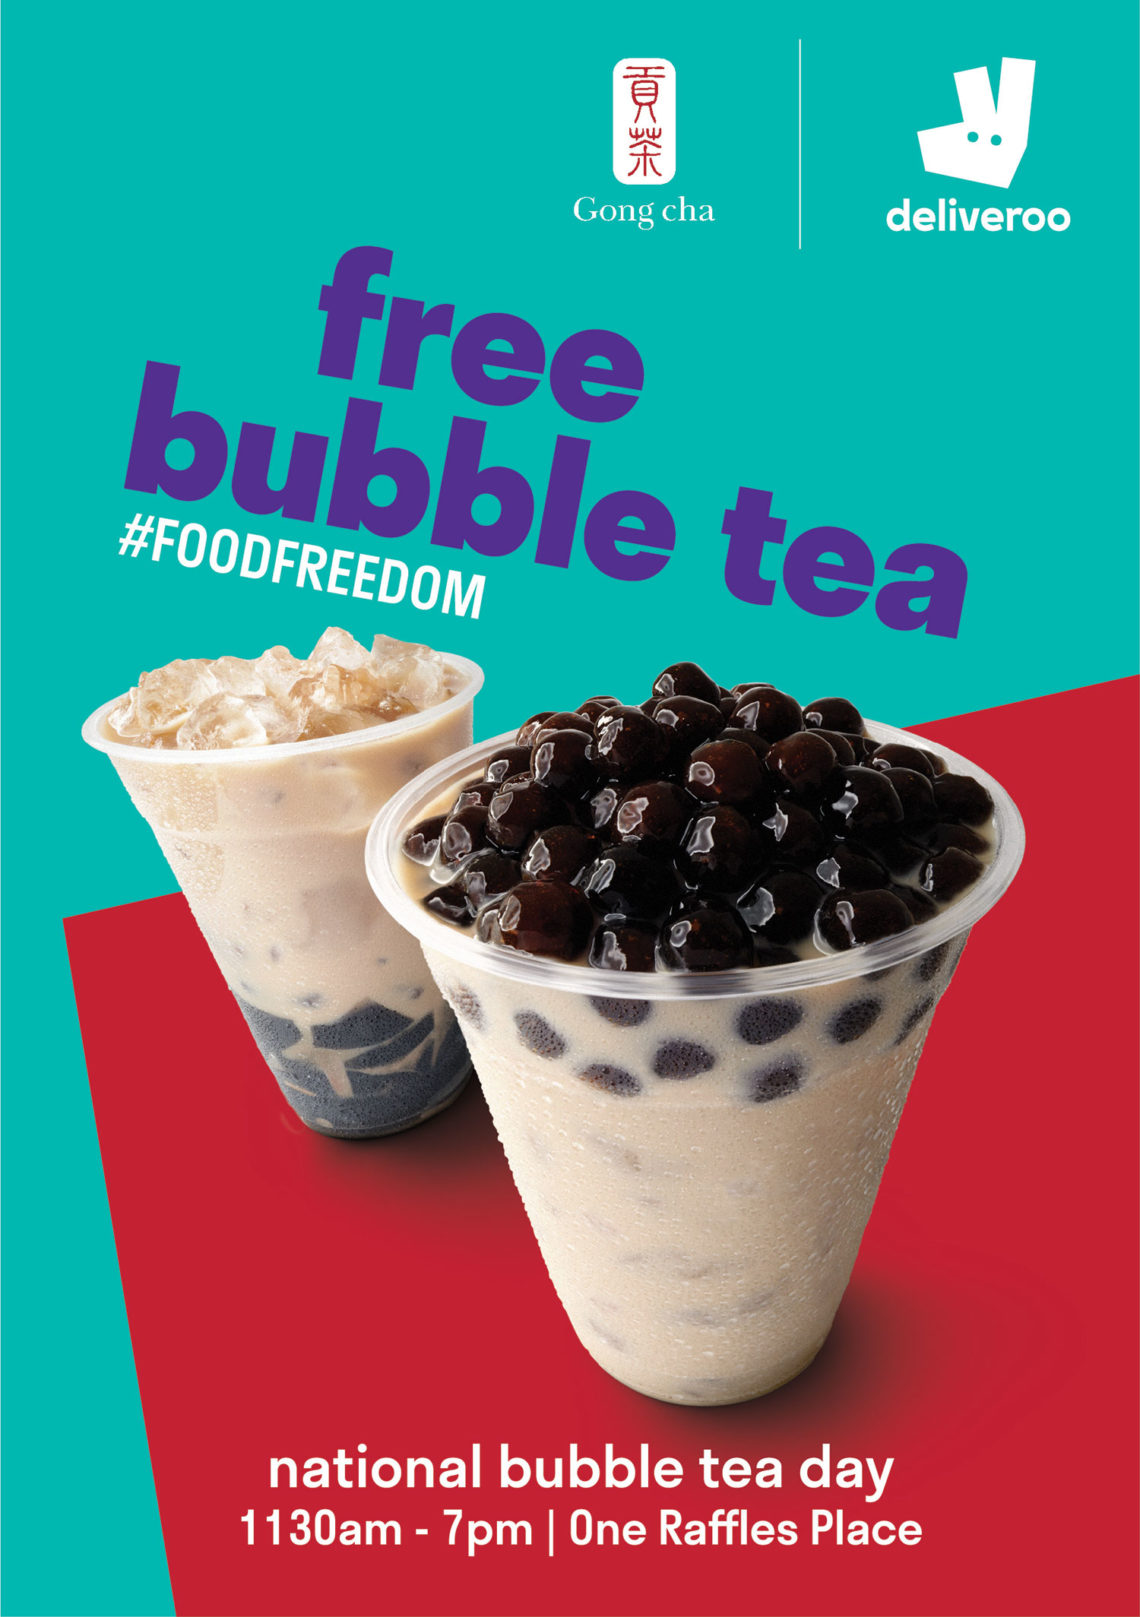 Enjoy FREE Bubble Tea from Gong Cha this National Bubble Tea Day